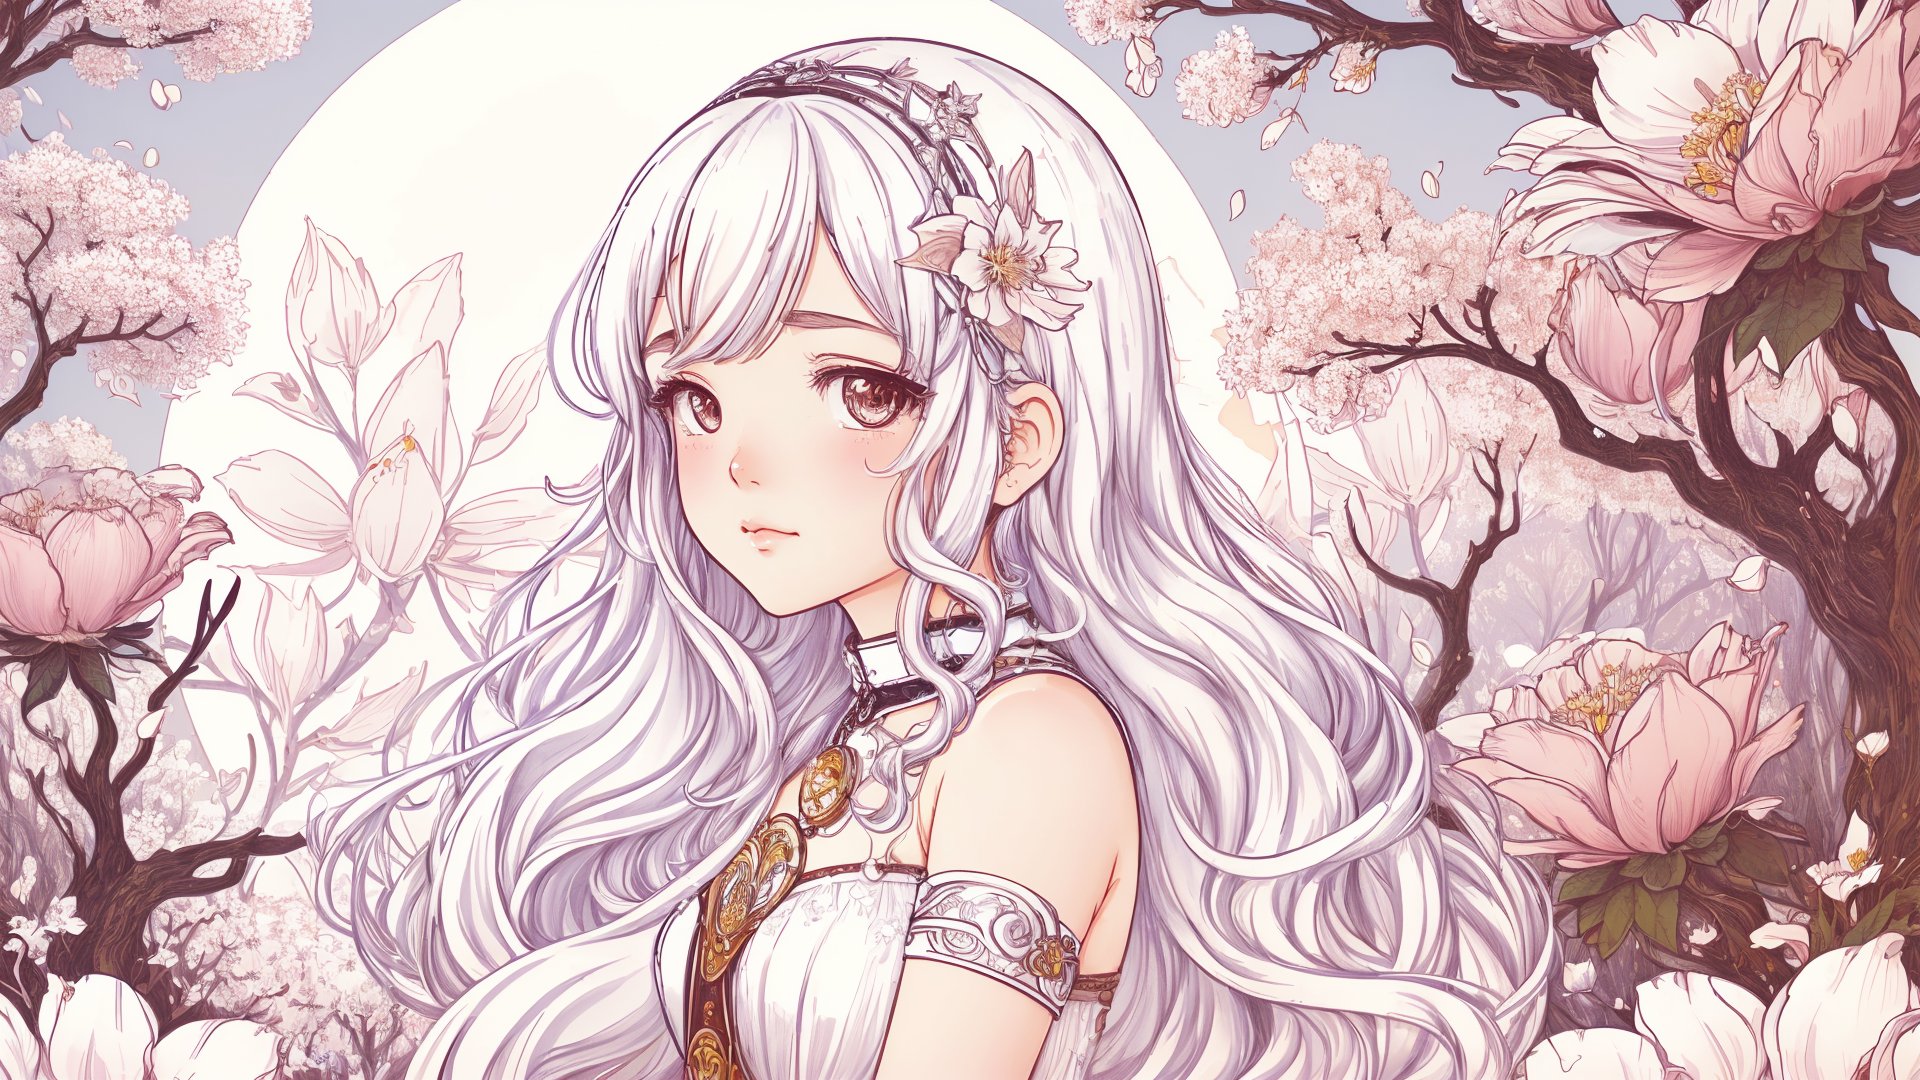 illustration of an adorable chibi girl , white hair , depth of field ,  textured, trees , flowers , branch, full moon , detailed figure ,xewx drawing style , artdeco, art nouveau ,xewx